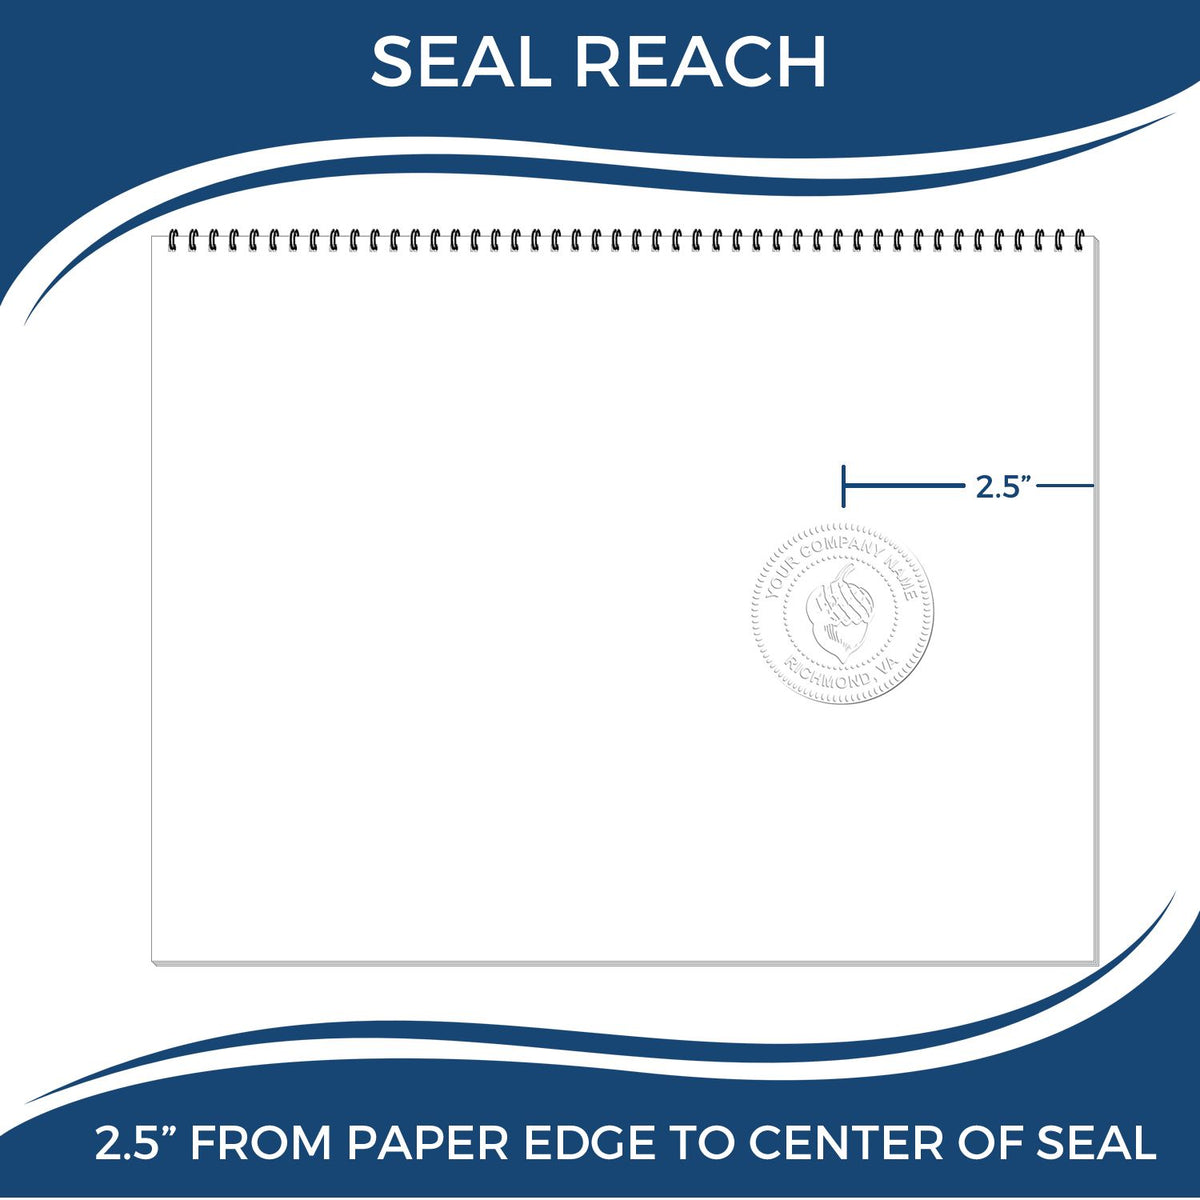 An infographic showing the seal reach which is represented by a ruler and a miniature seal image of the Heavy Duty Cast Iron Delaware Land Surveyor Seal Embosser